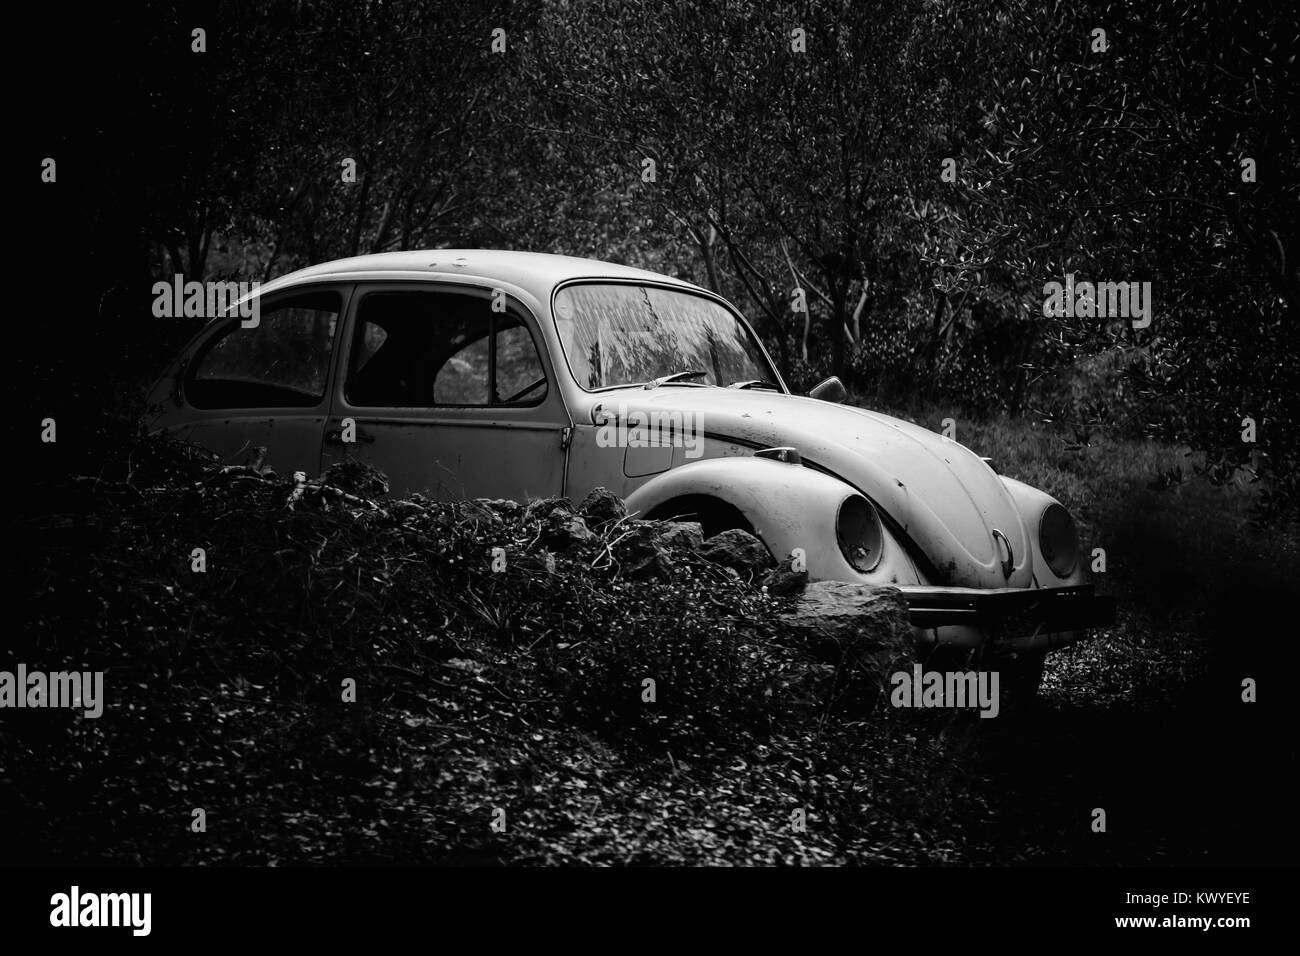 Wreck of an old and rusty car in the bushes and among the trees, a black and white image Stock Photo